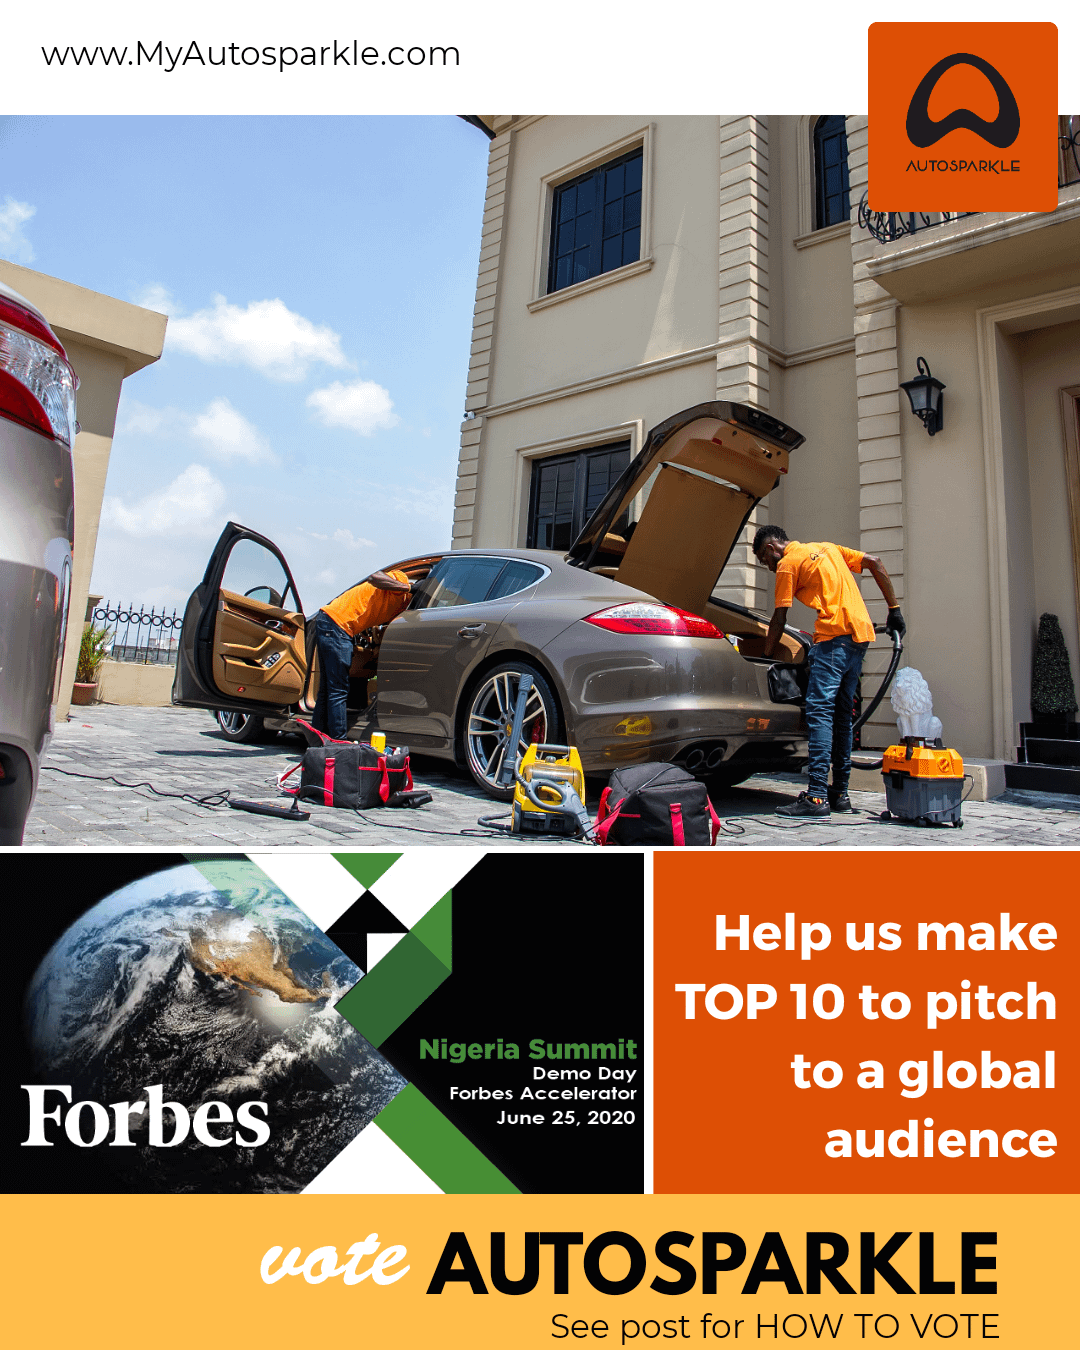 Autosparkle team feature image for Forbes